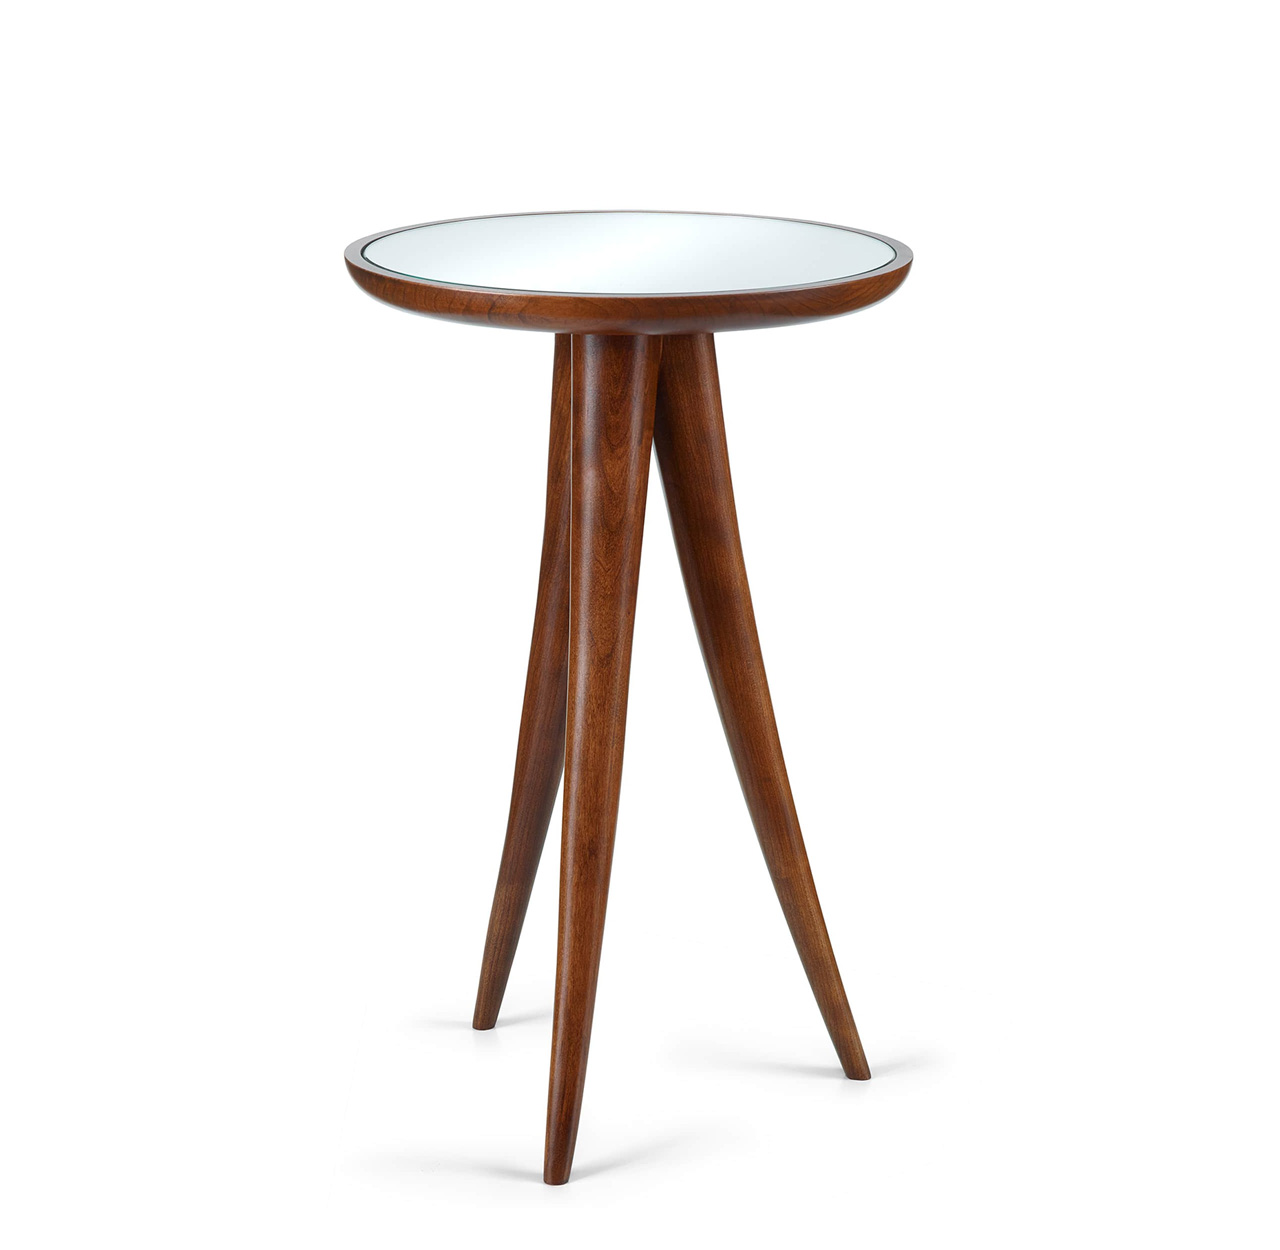 20" tall drink table